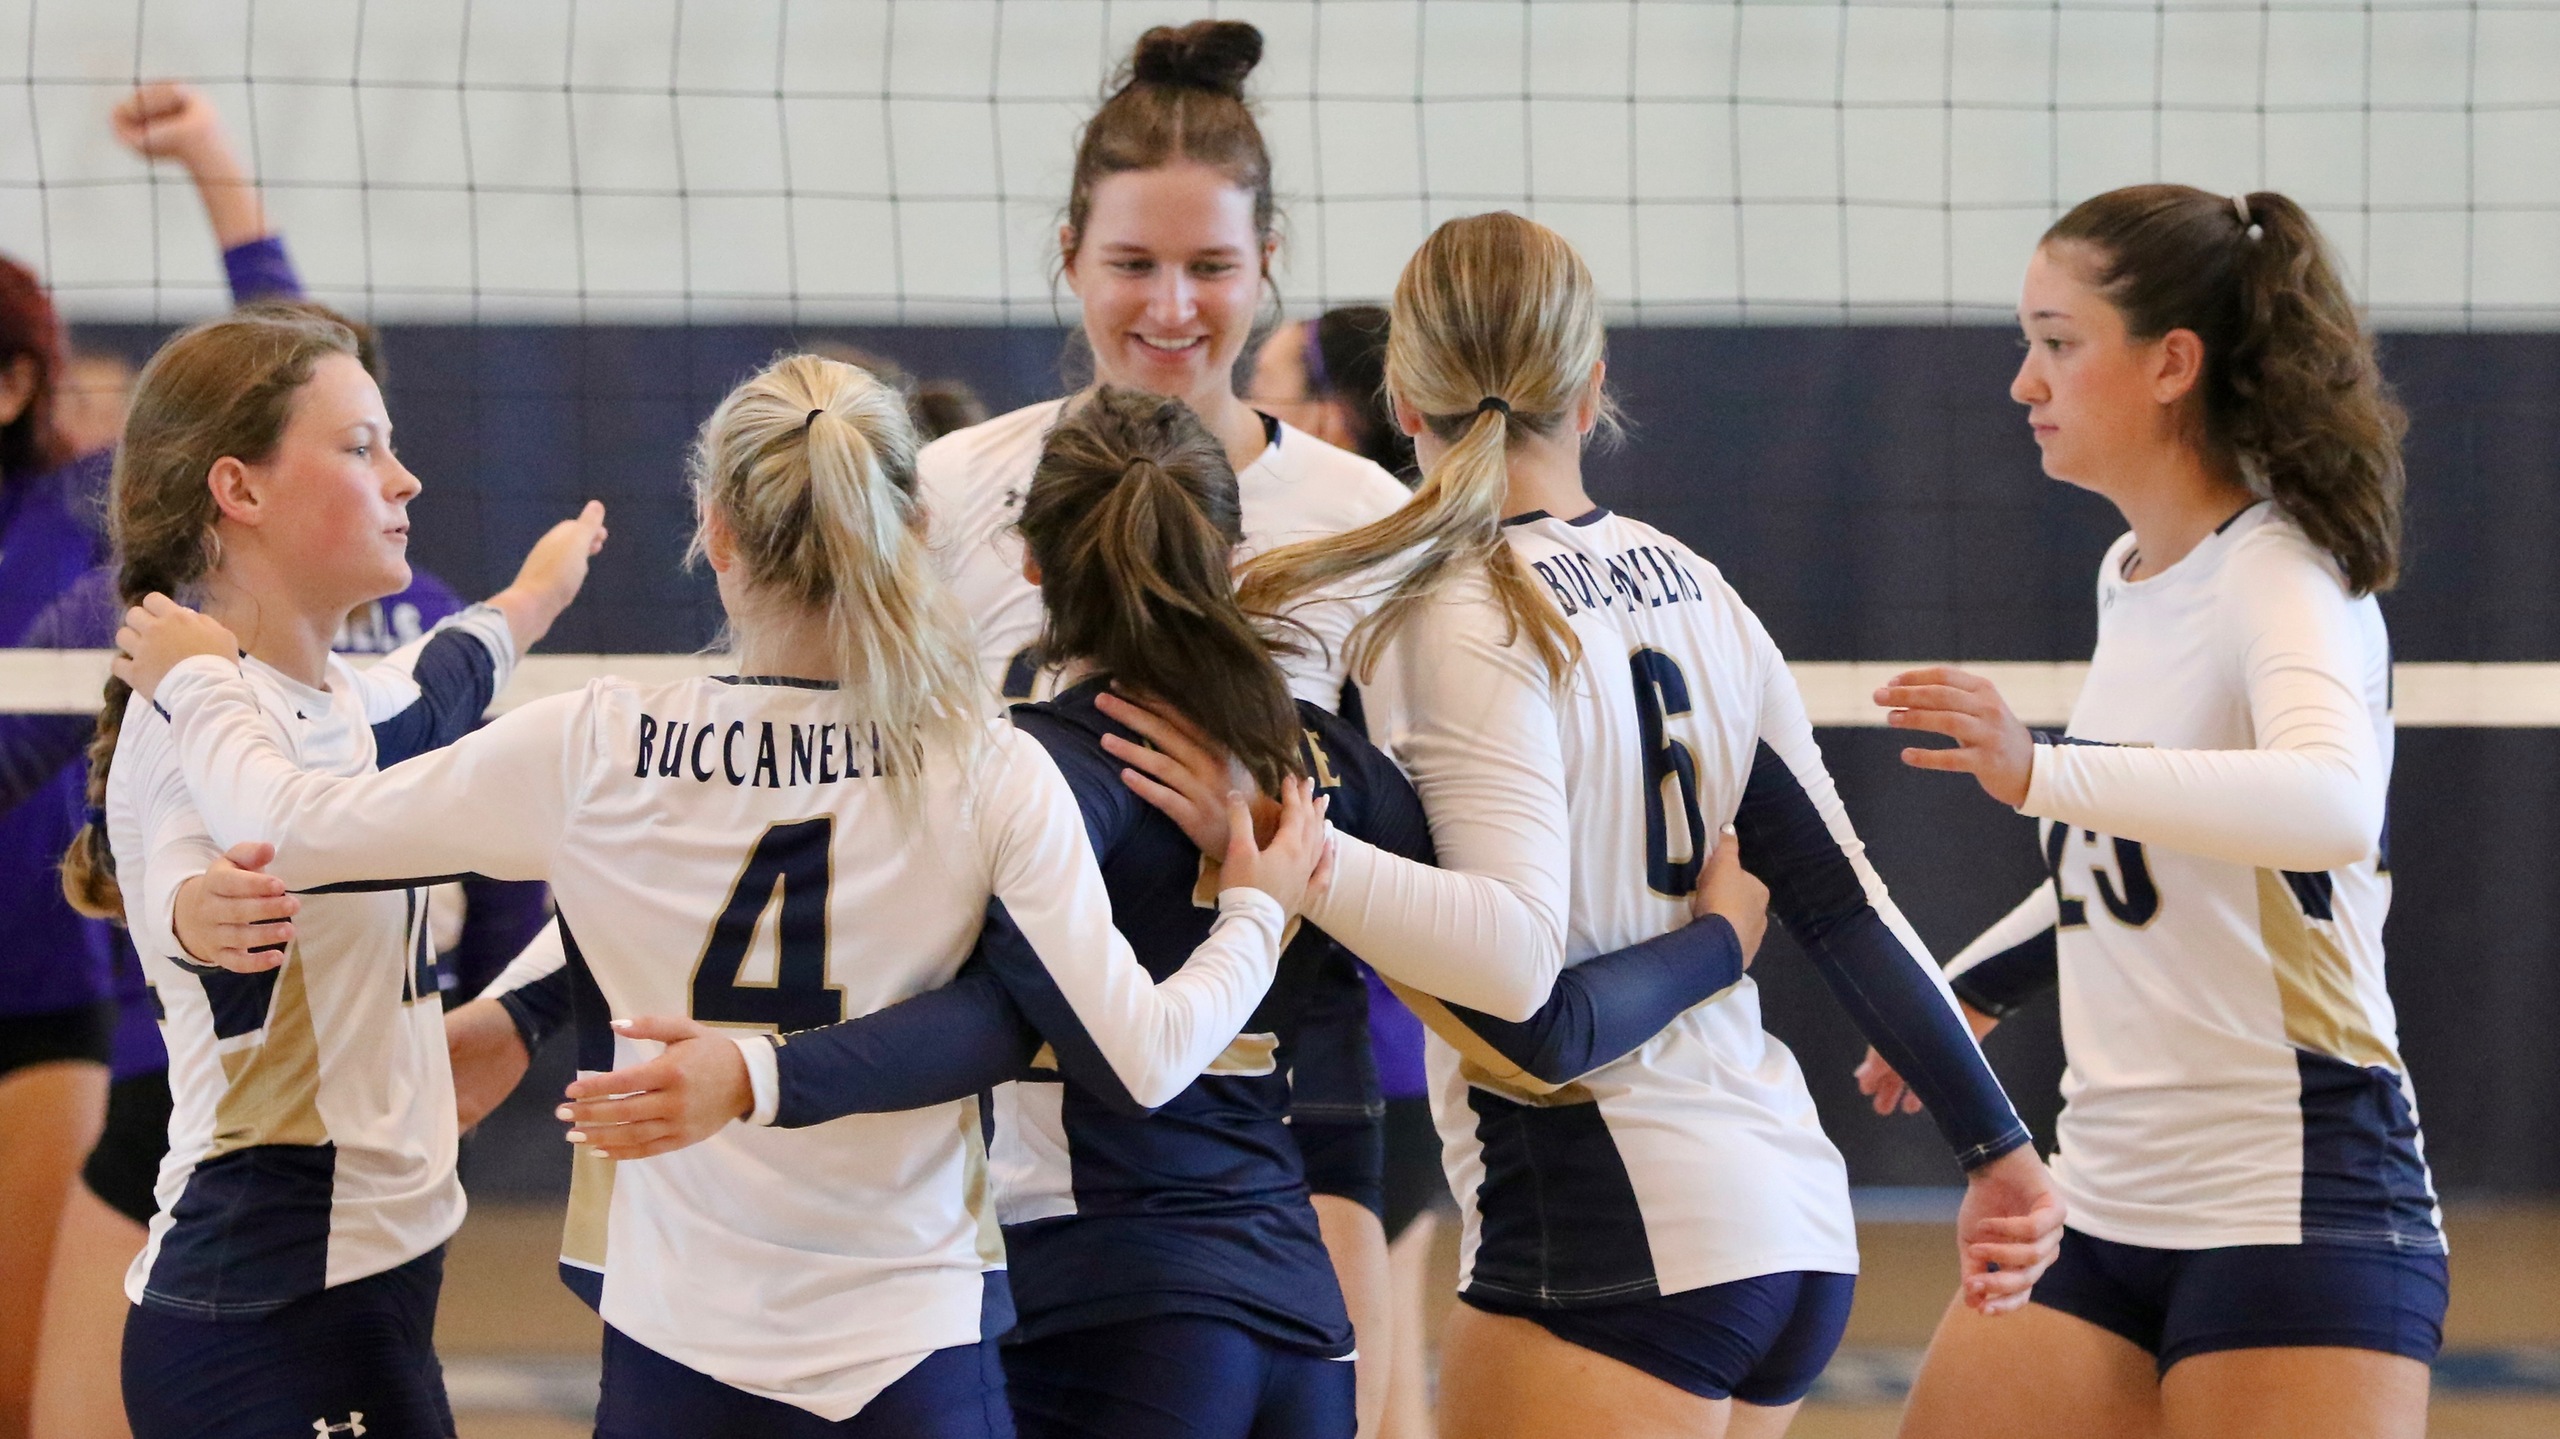 Volleyball: Bucs Split With Lynx and Grims